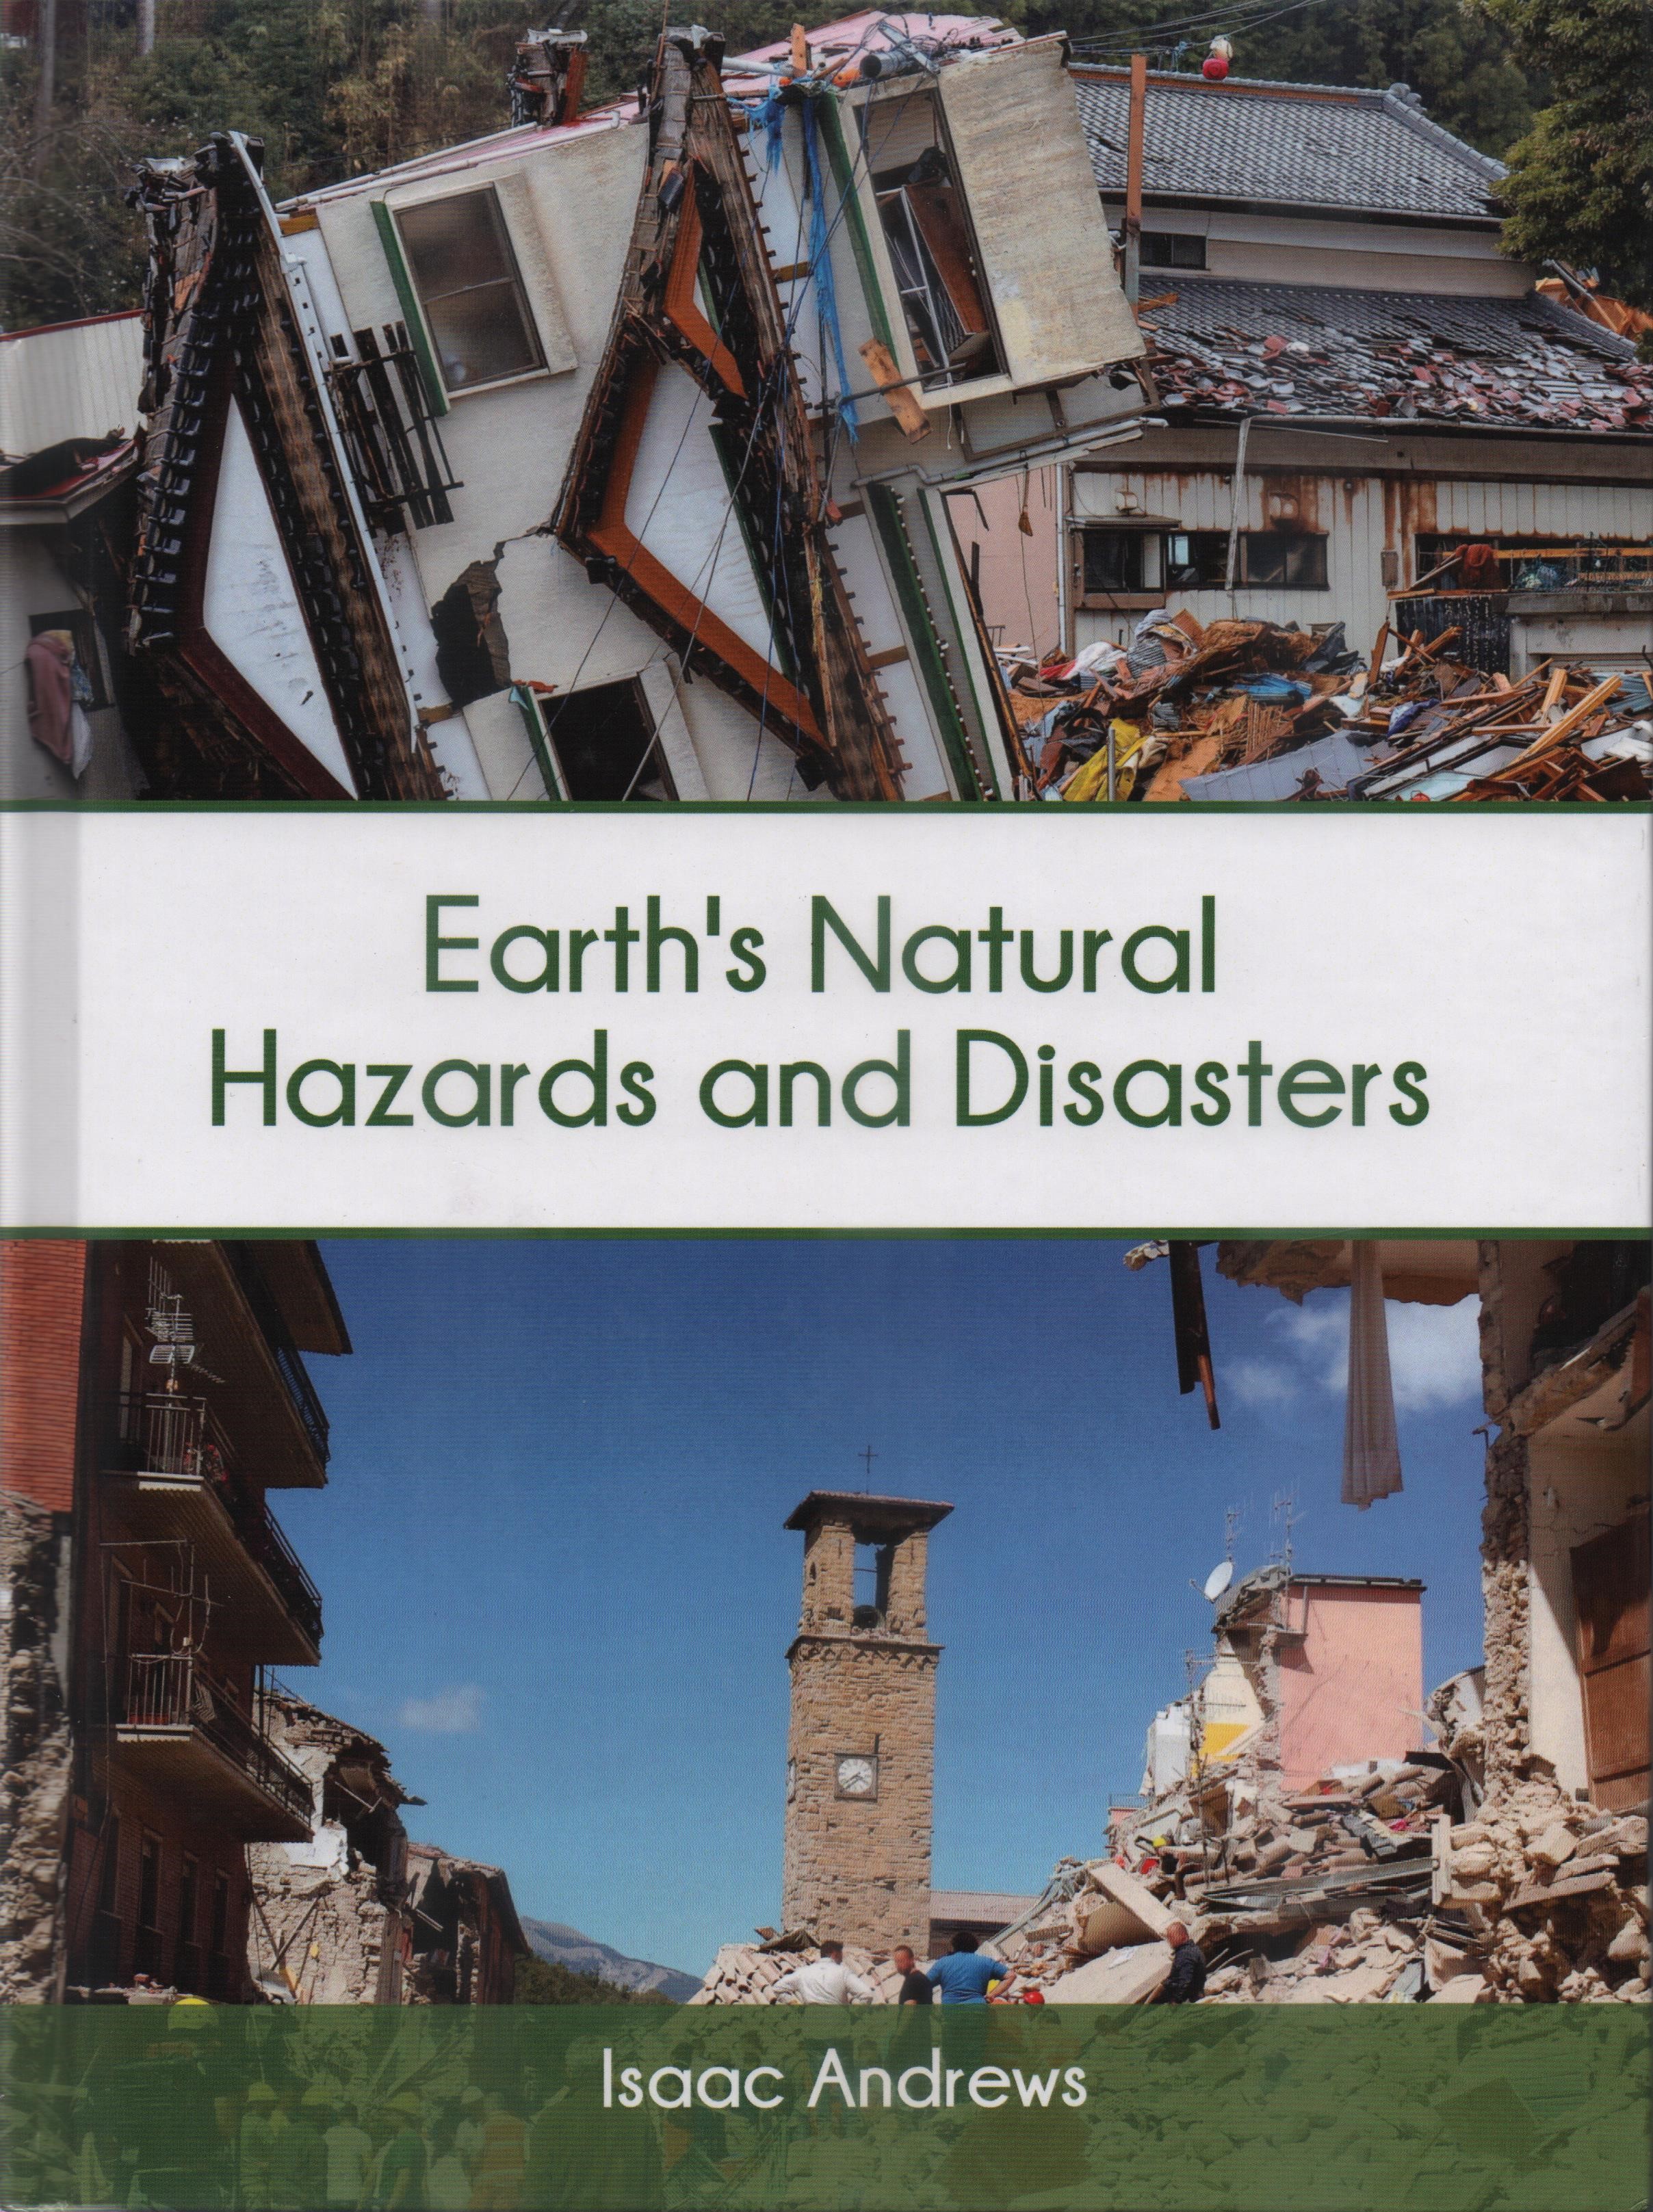 Earth's natural hazards and disasters